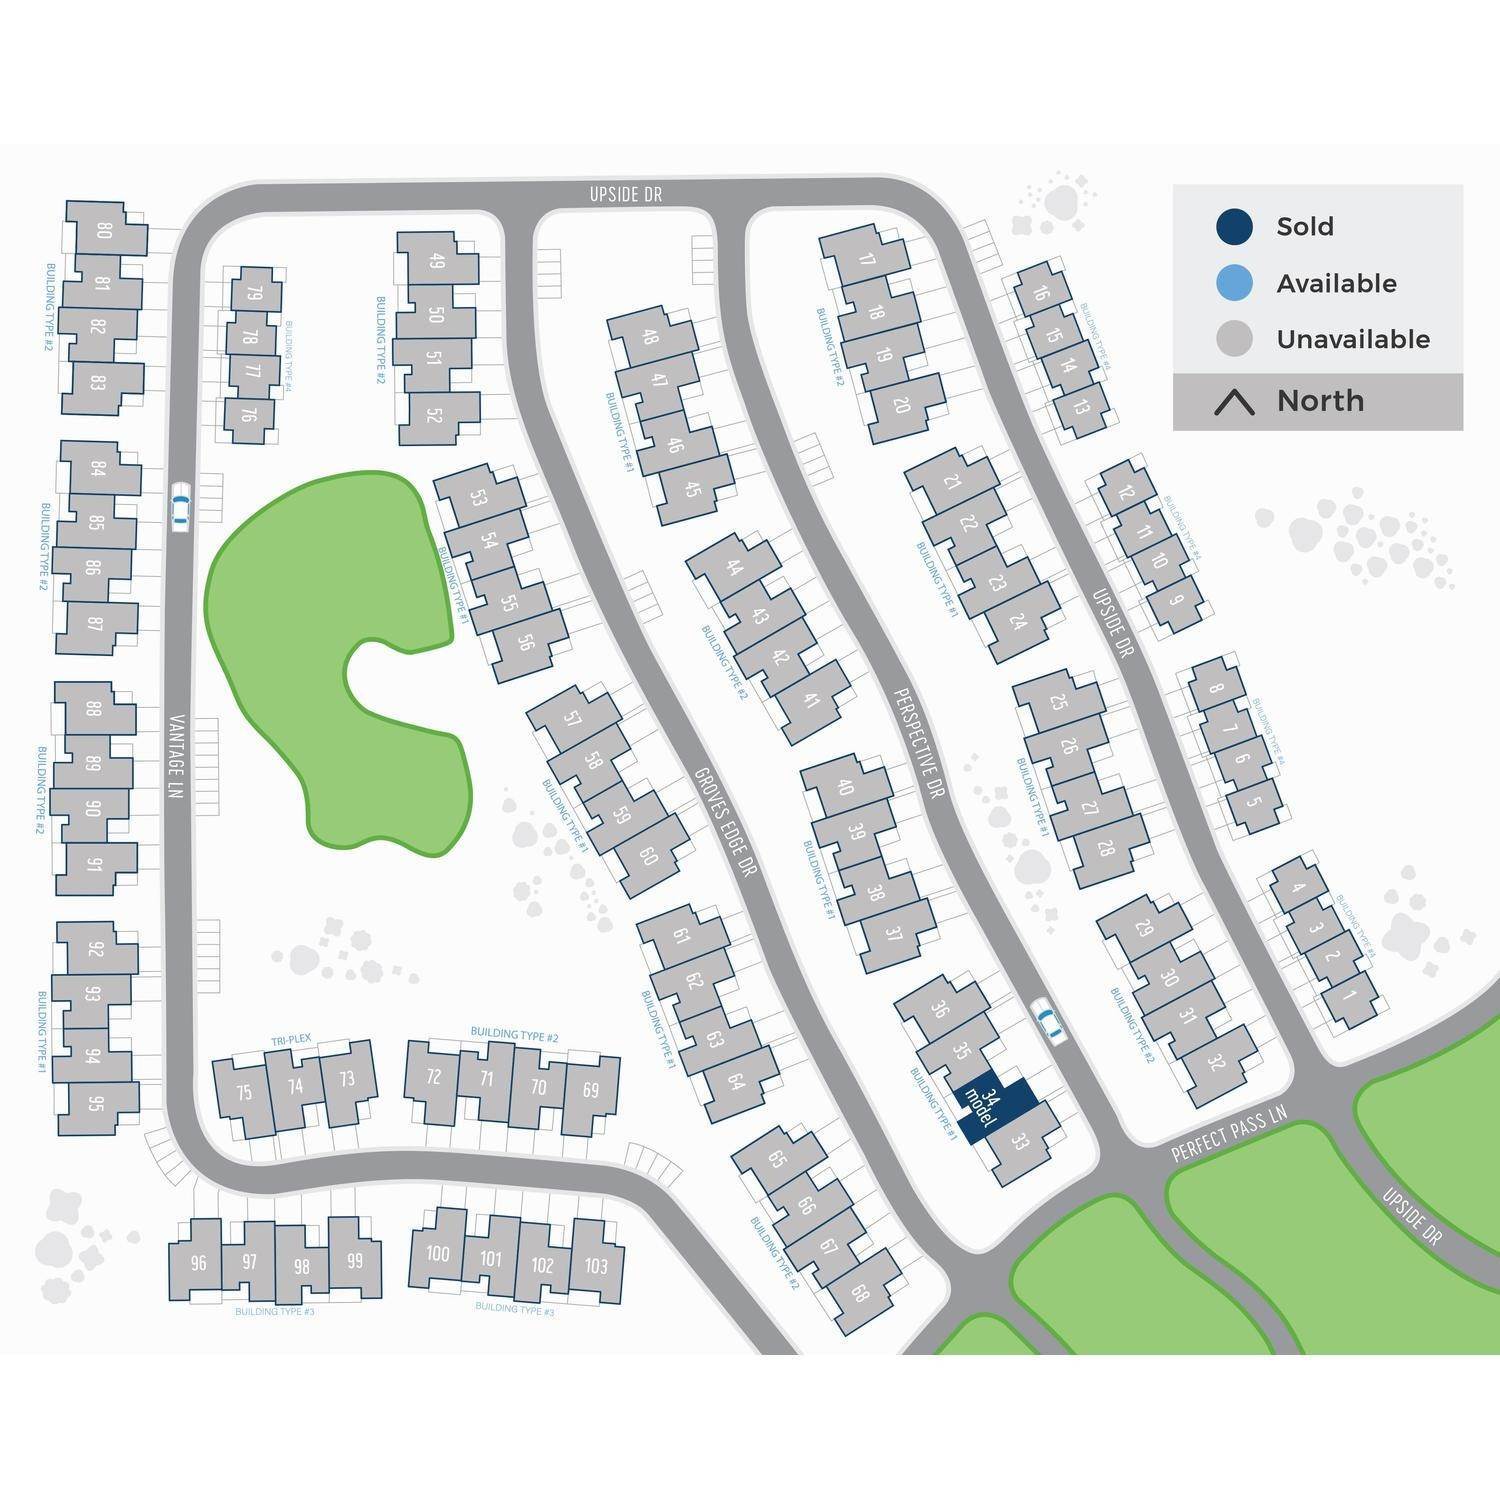 8. 11449 N. Perspective Drive, Hideout Canyon, UT 84036에 Shoreline Townhomes 건물